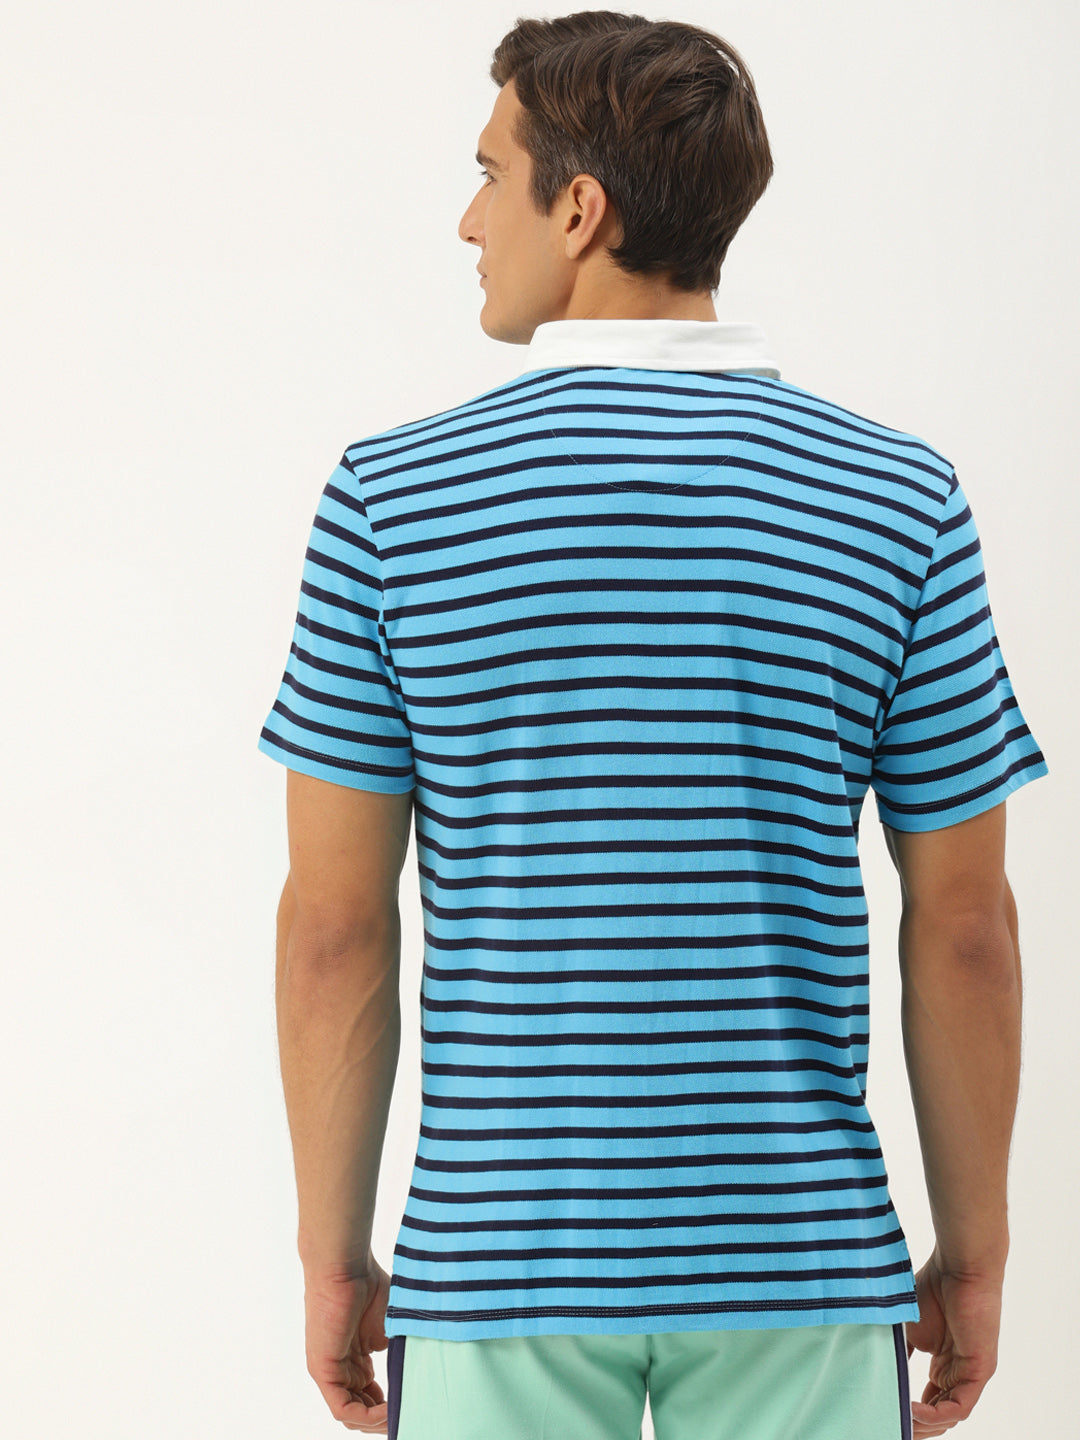 Men's Collar T-Shirts with Stripes in Premium Cotton and Half Sleeves